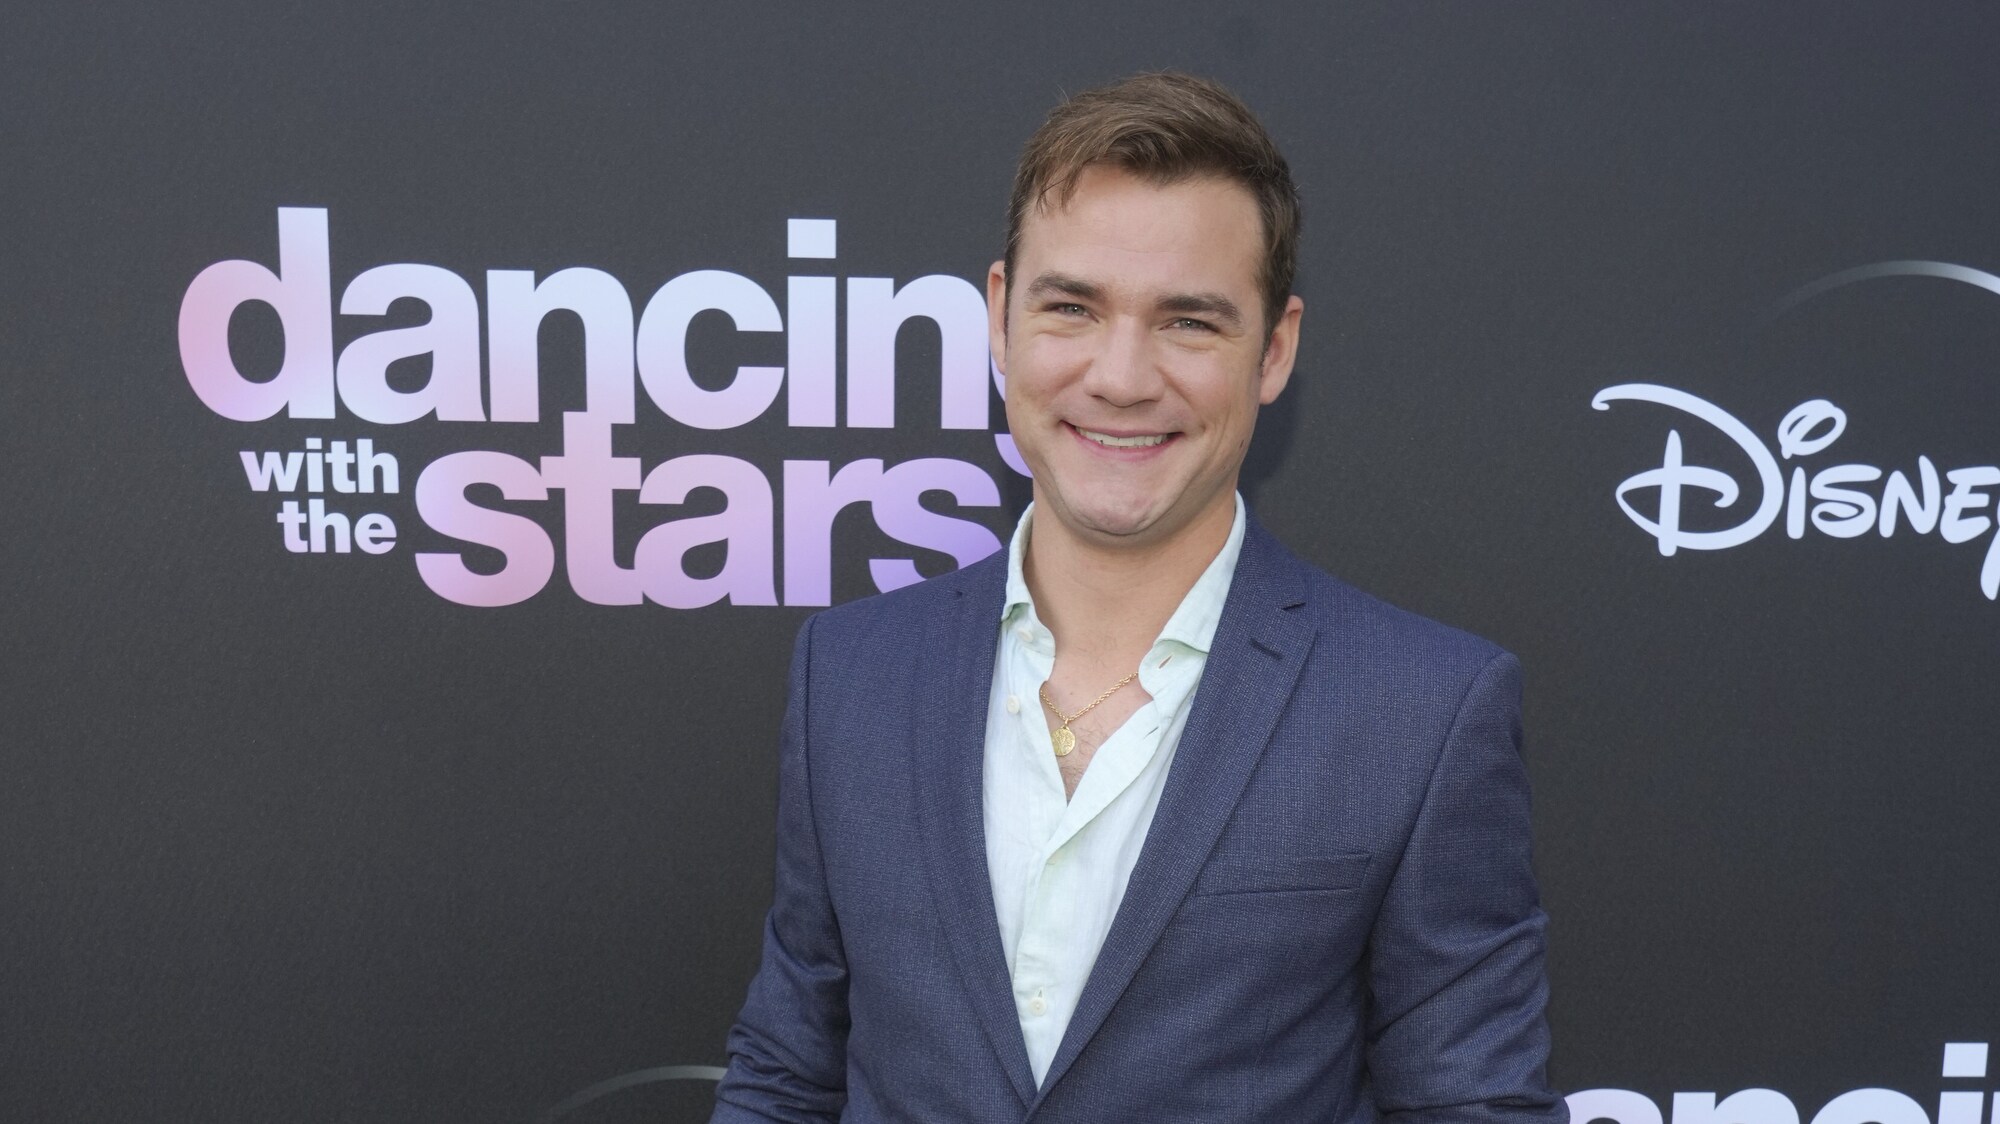 DANCING WITH THE STARS - "Episode TBD" (ABC/Ben Hider) DANIEL DURANT